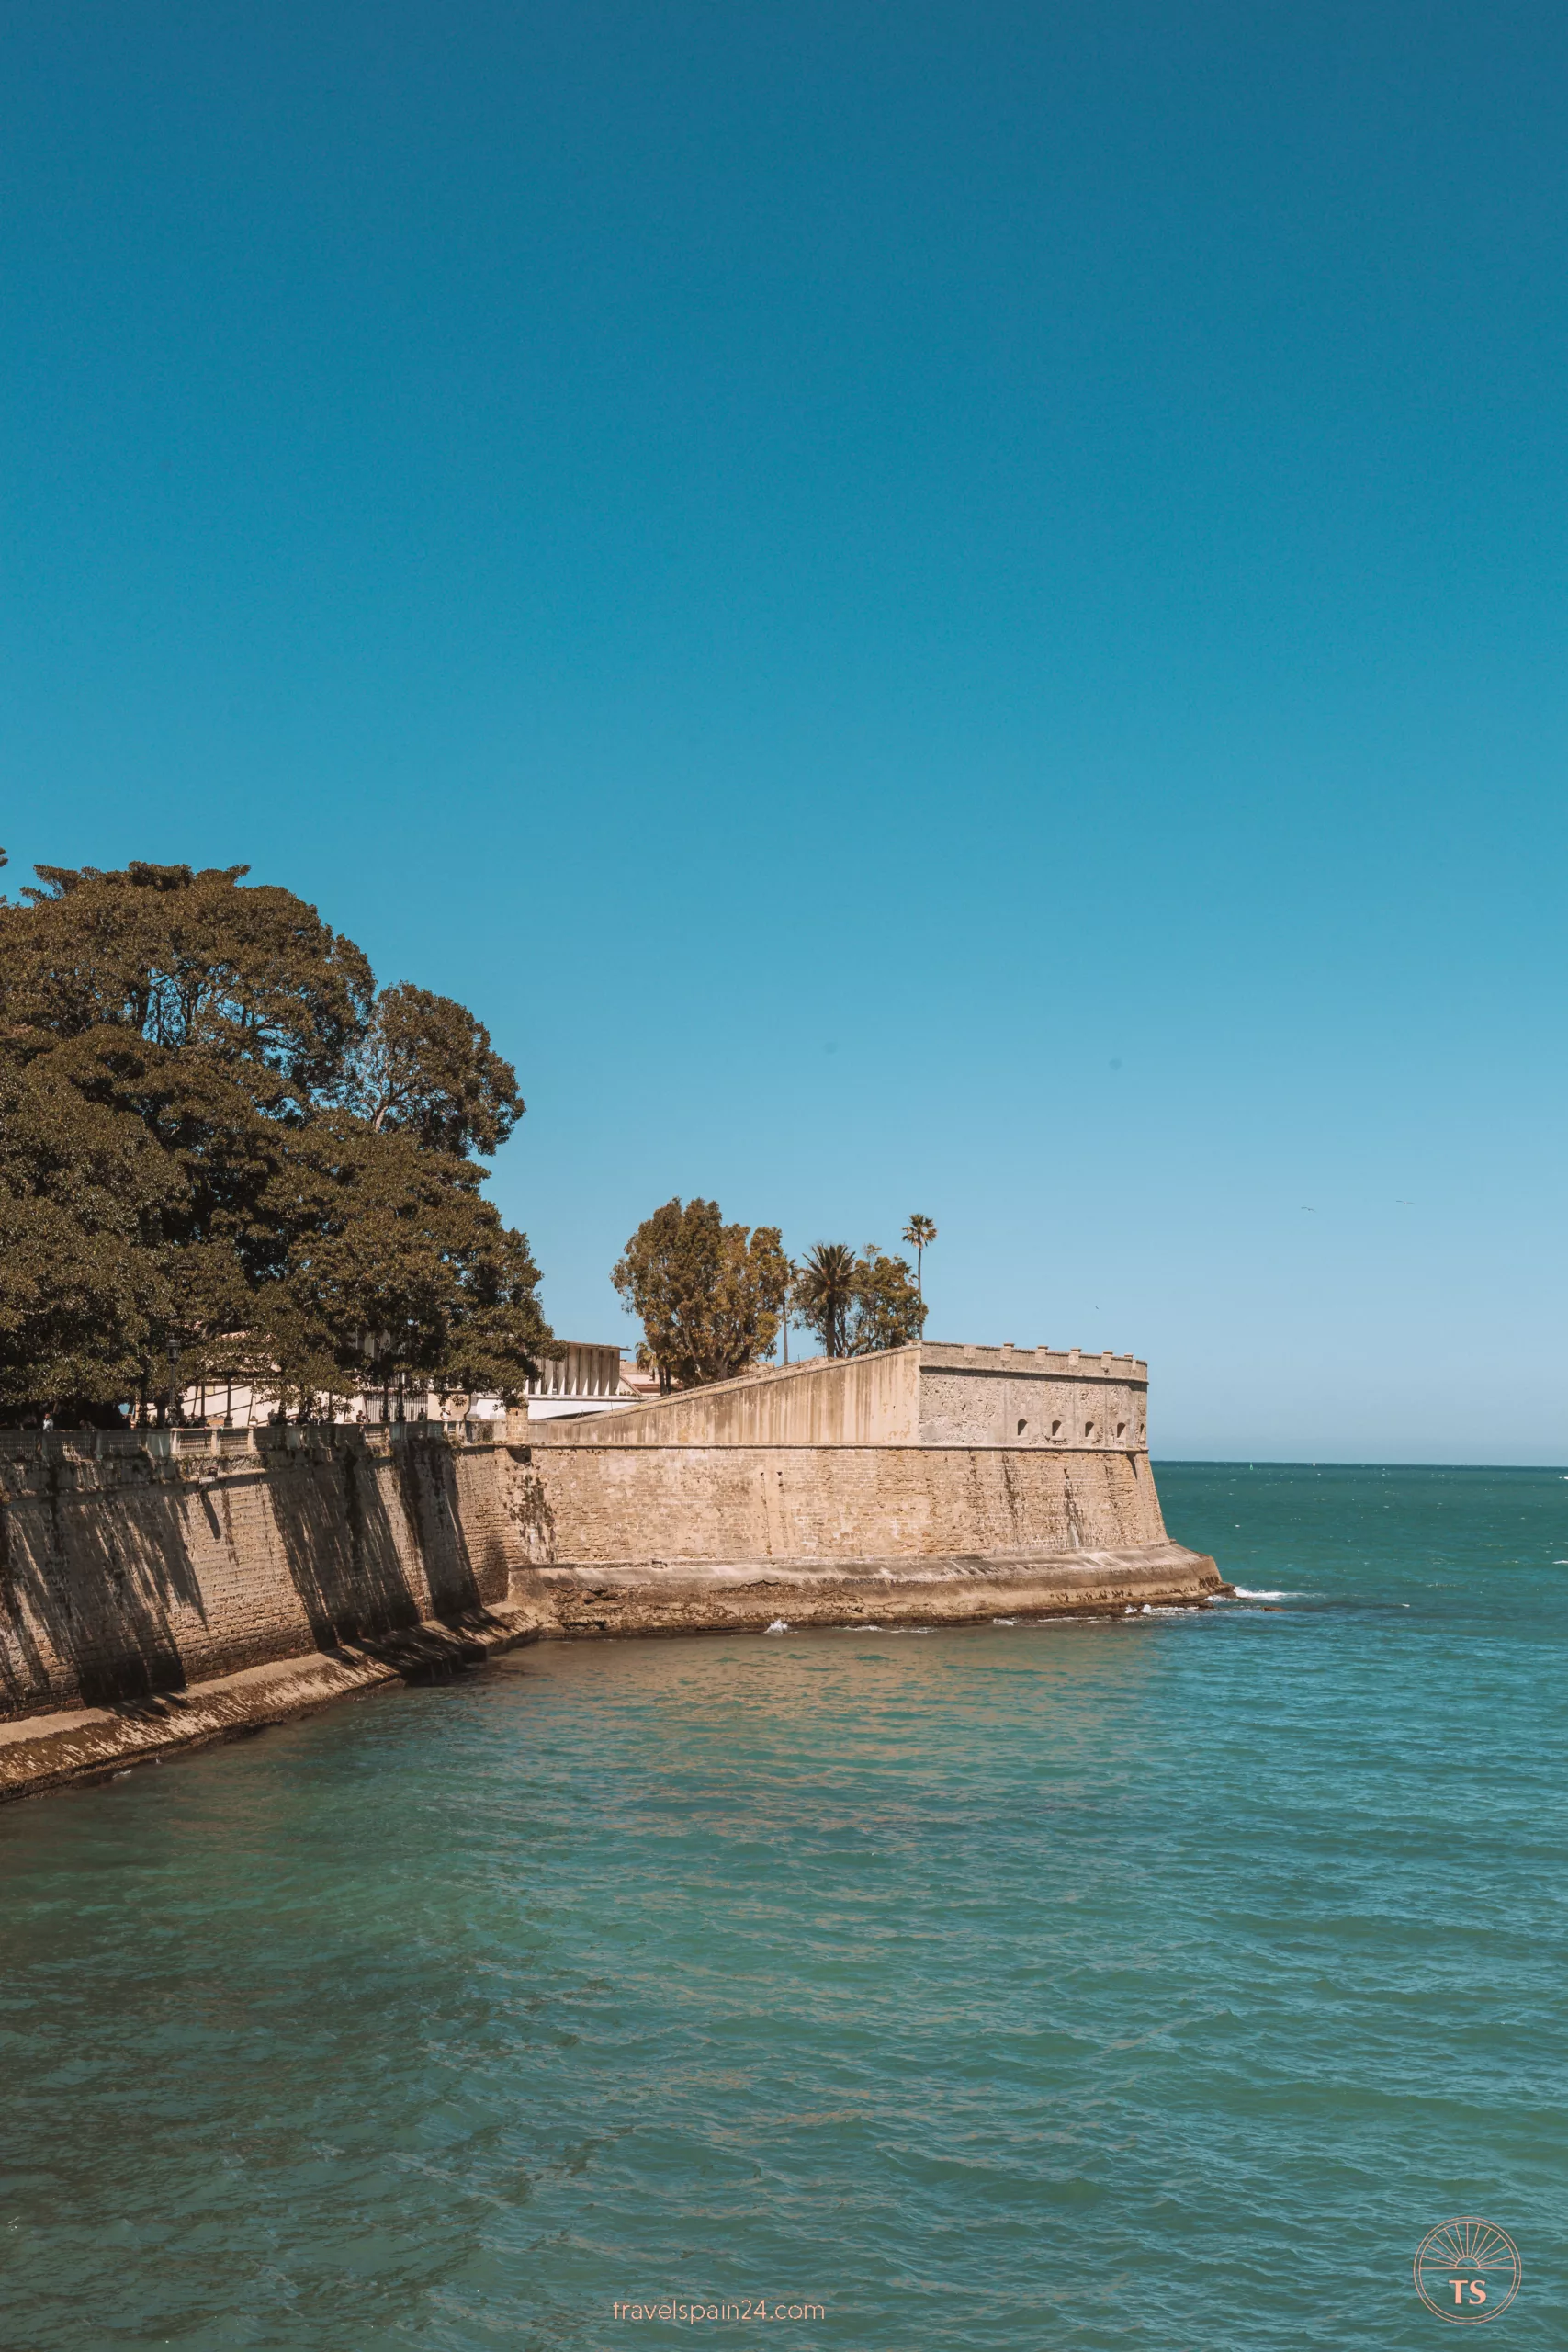 Exterior view of Baluarte de Cadiz, with sunlight illuminating its walls and waves crashing against it. This image captures the beauty of Cadiz's coastal fortification.